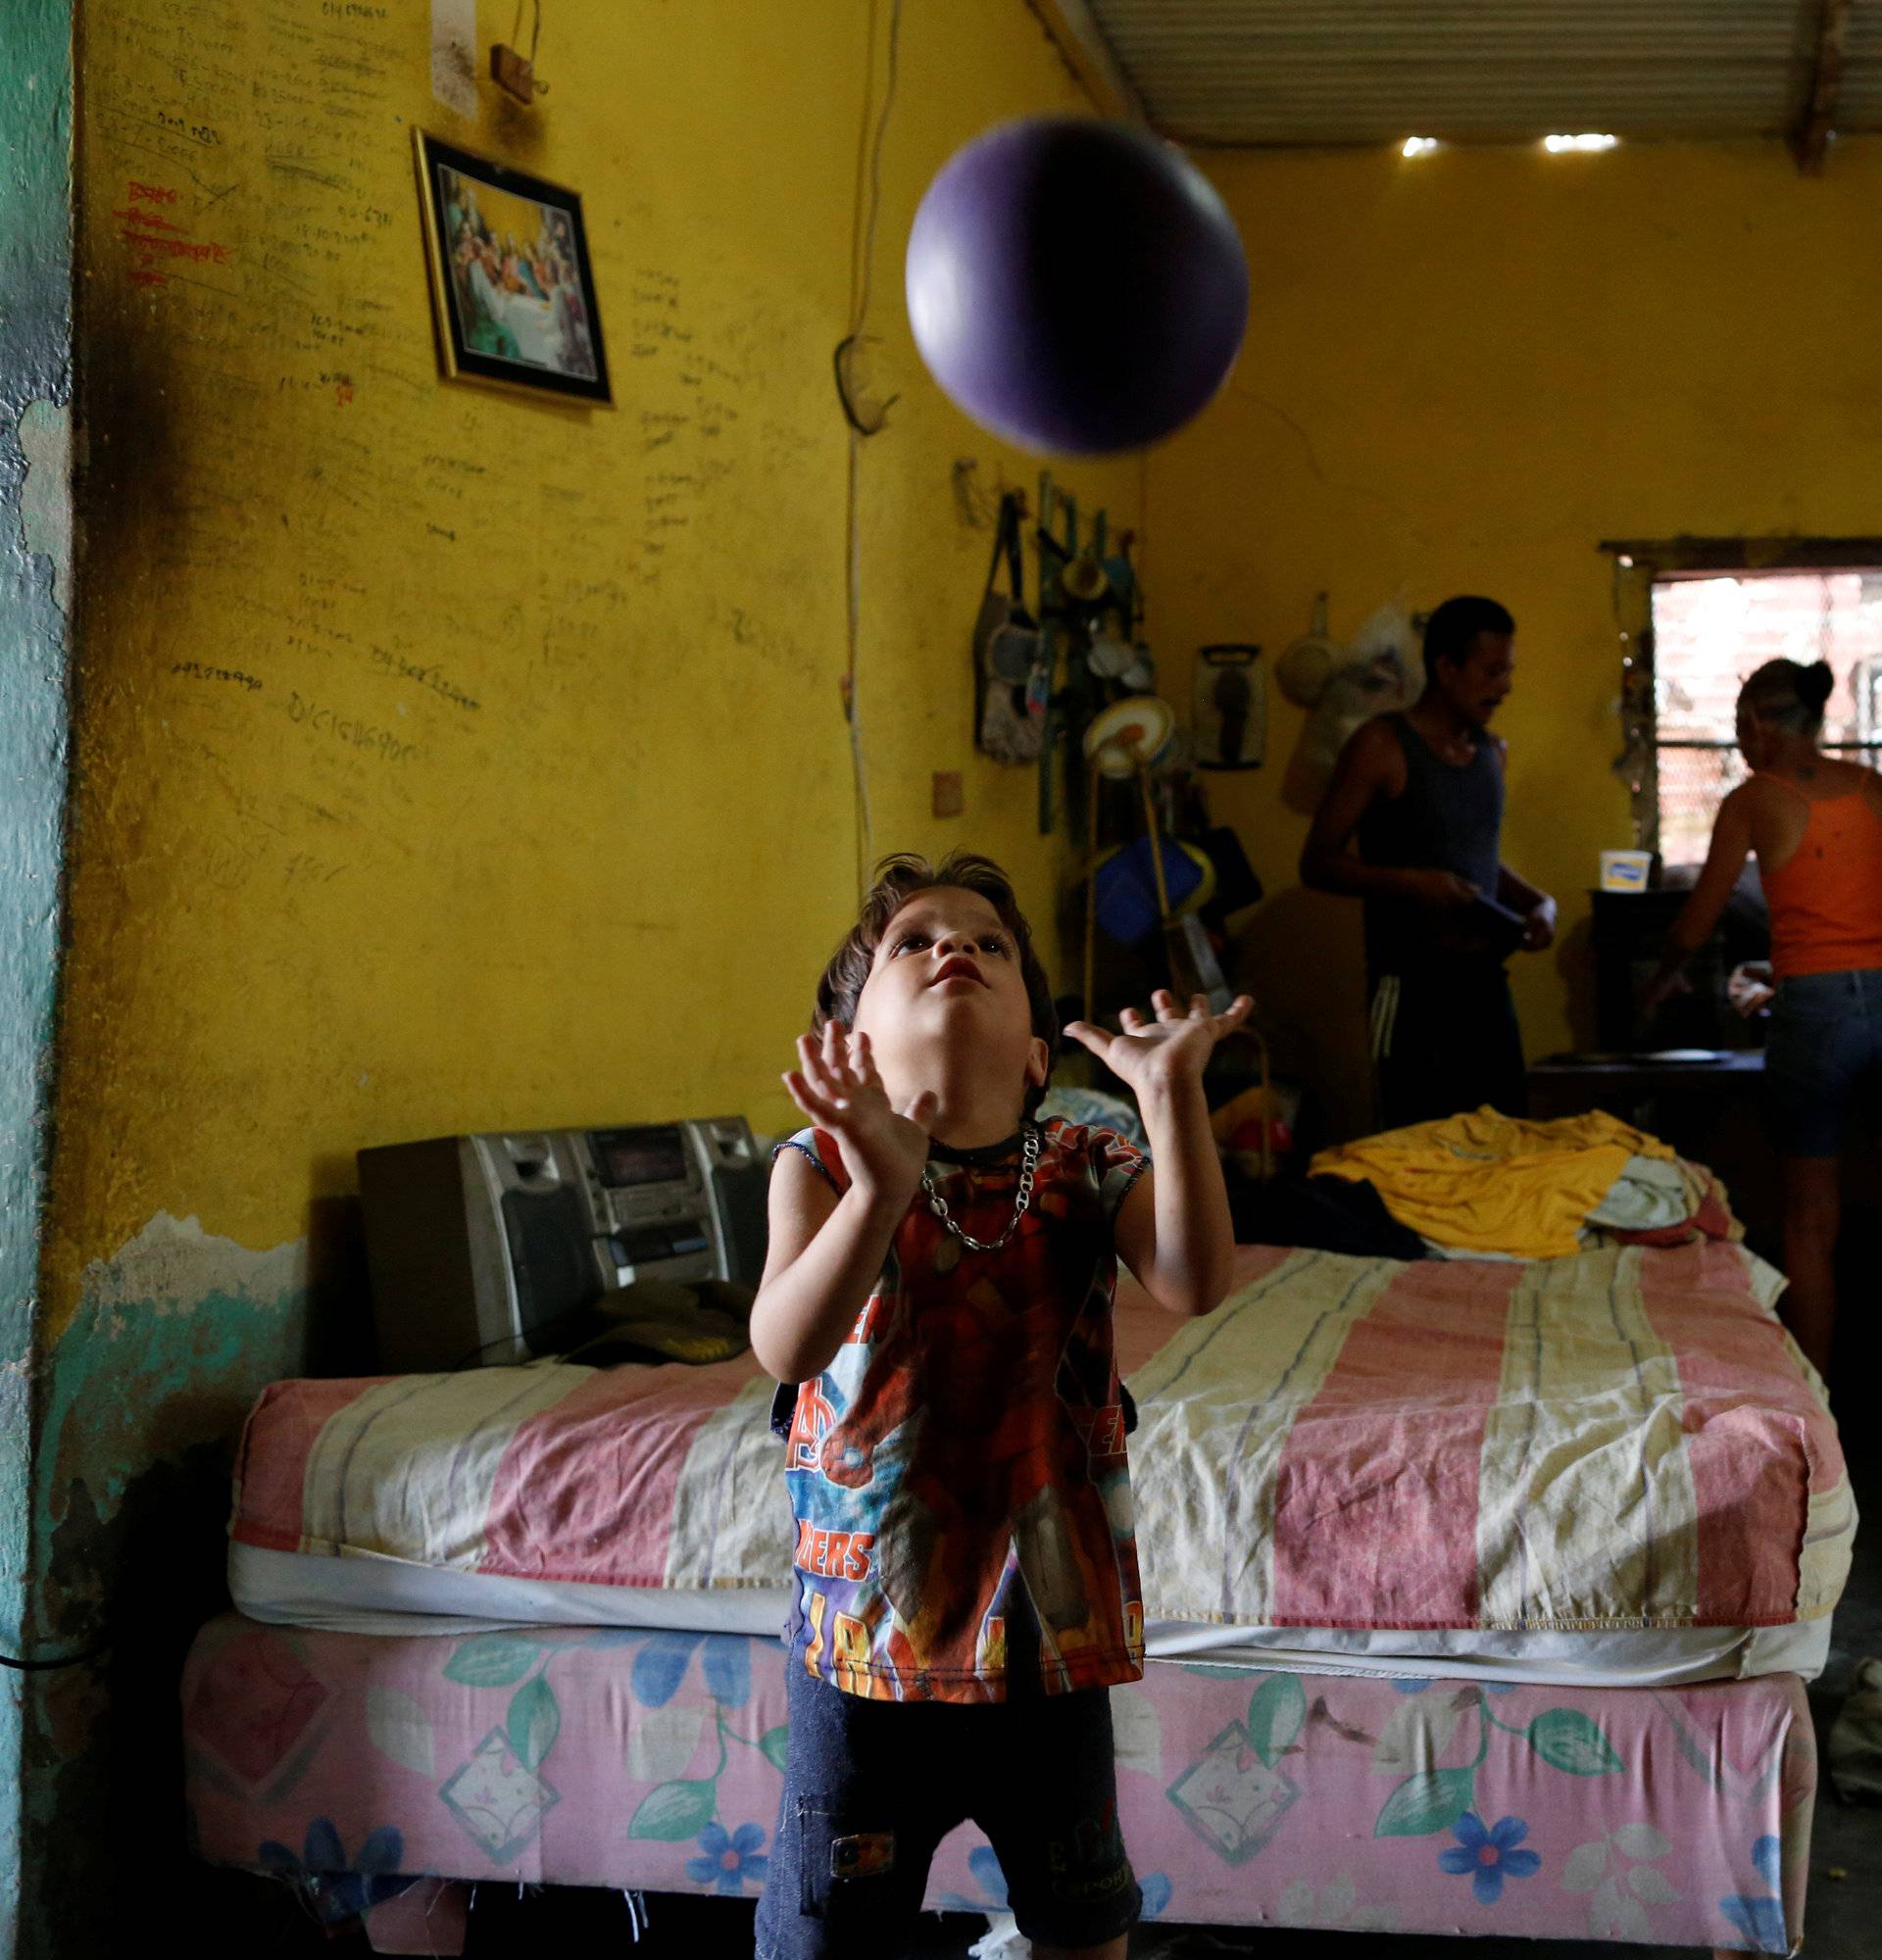 Emmanuel Cuauro plays with a ball next to his parents Zulay Pulgar and Maikel Cuauro in their house in Punto Fijo